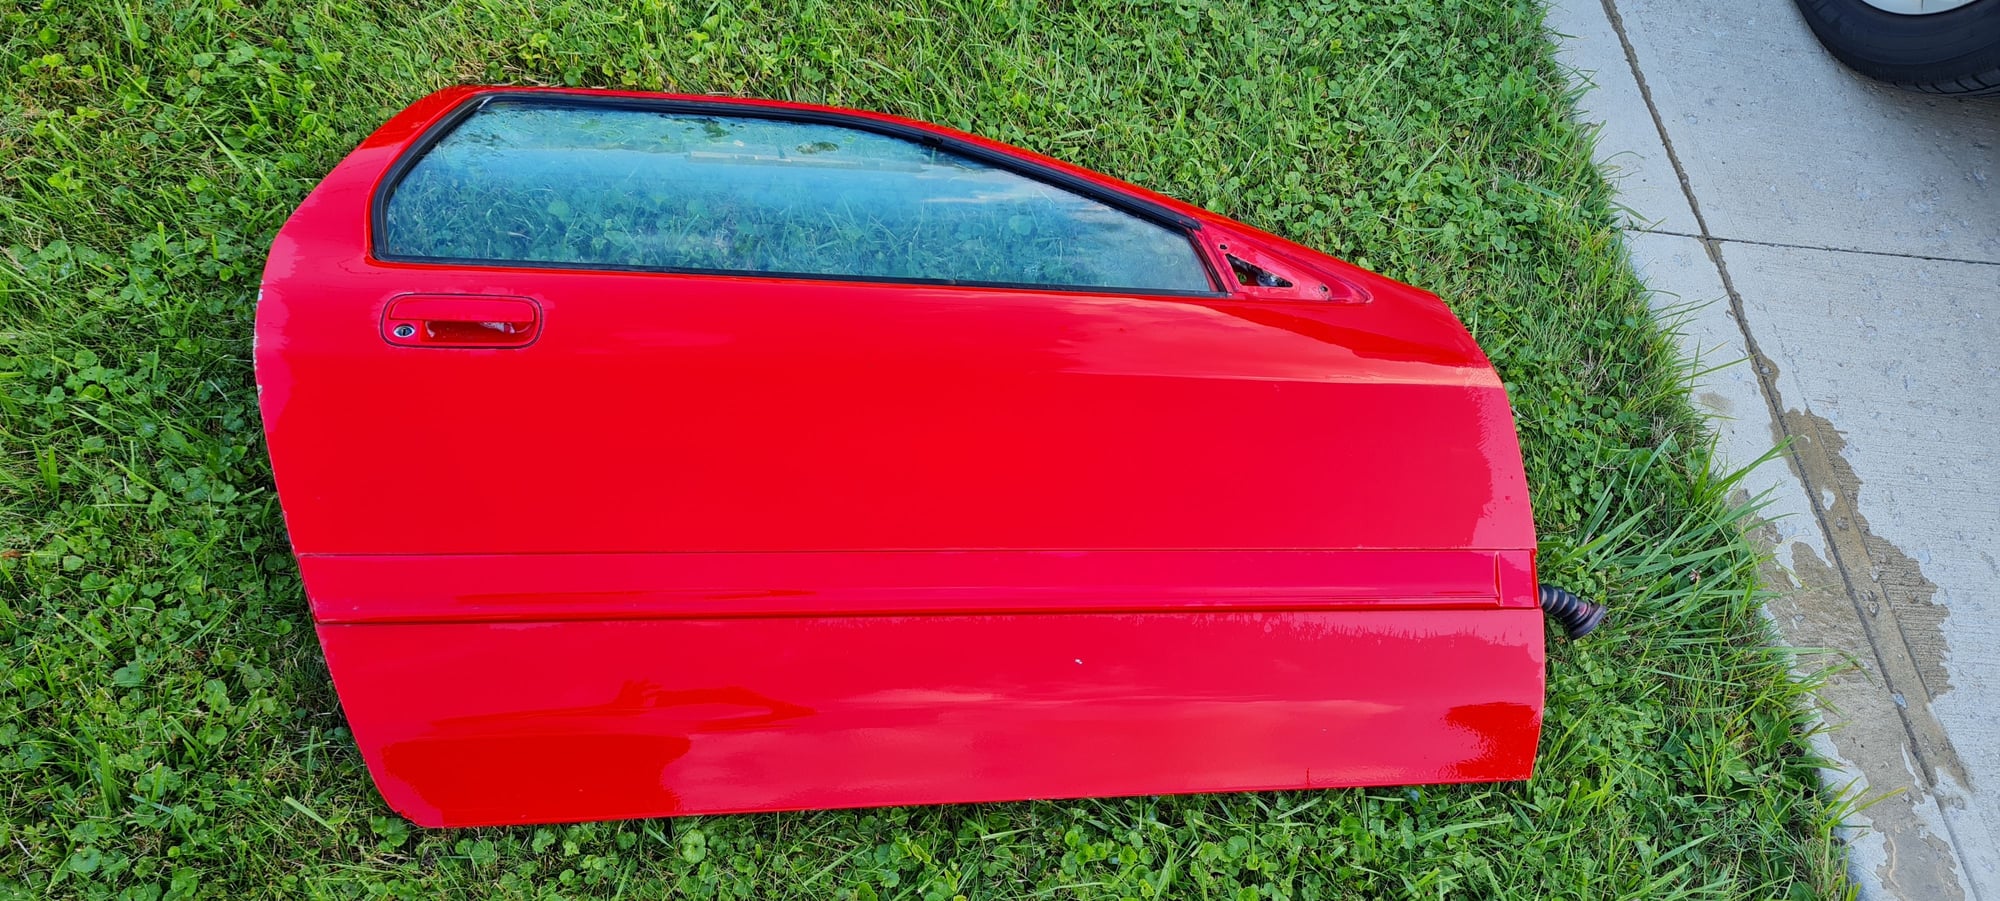 Exterior Body Parts - 1991 RX-7 rear glass hatch with wiper hole, left and right doors with power windows - Used - 1988 to 1991 Mazda RX-7 - Strongsville, OH 44136, United States